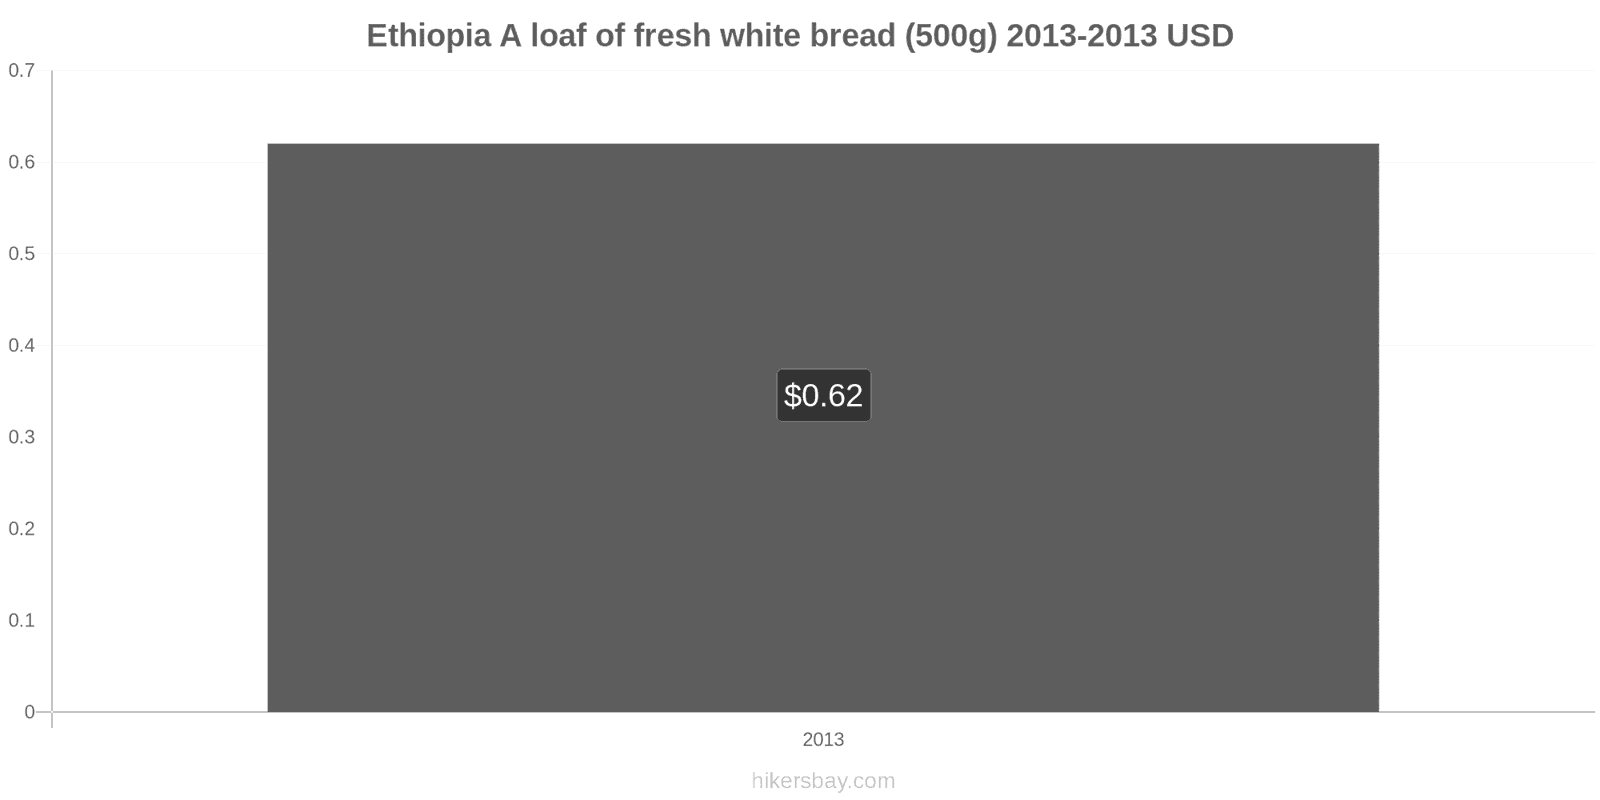 Ethiopia price changes A loaf of fresh white bread (500g) hikersbay.com